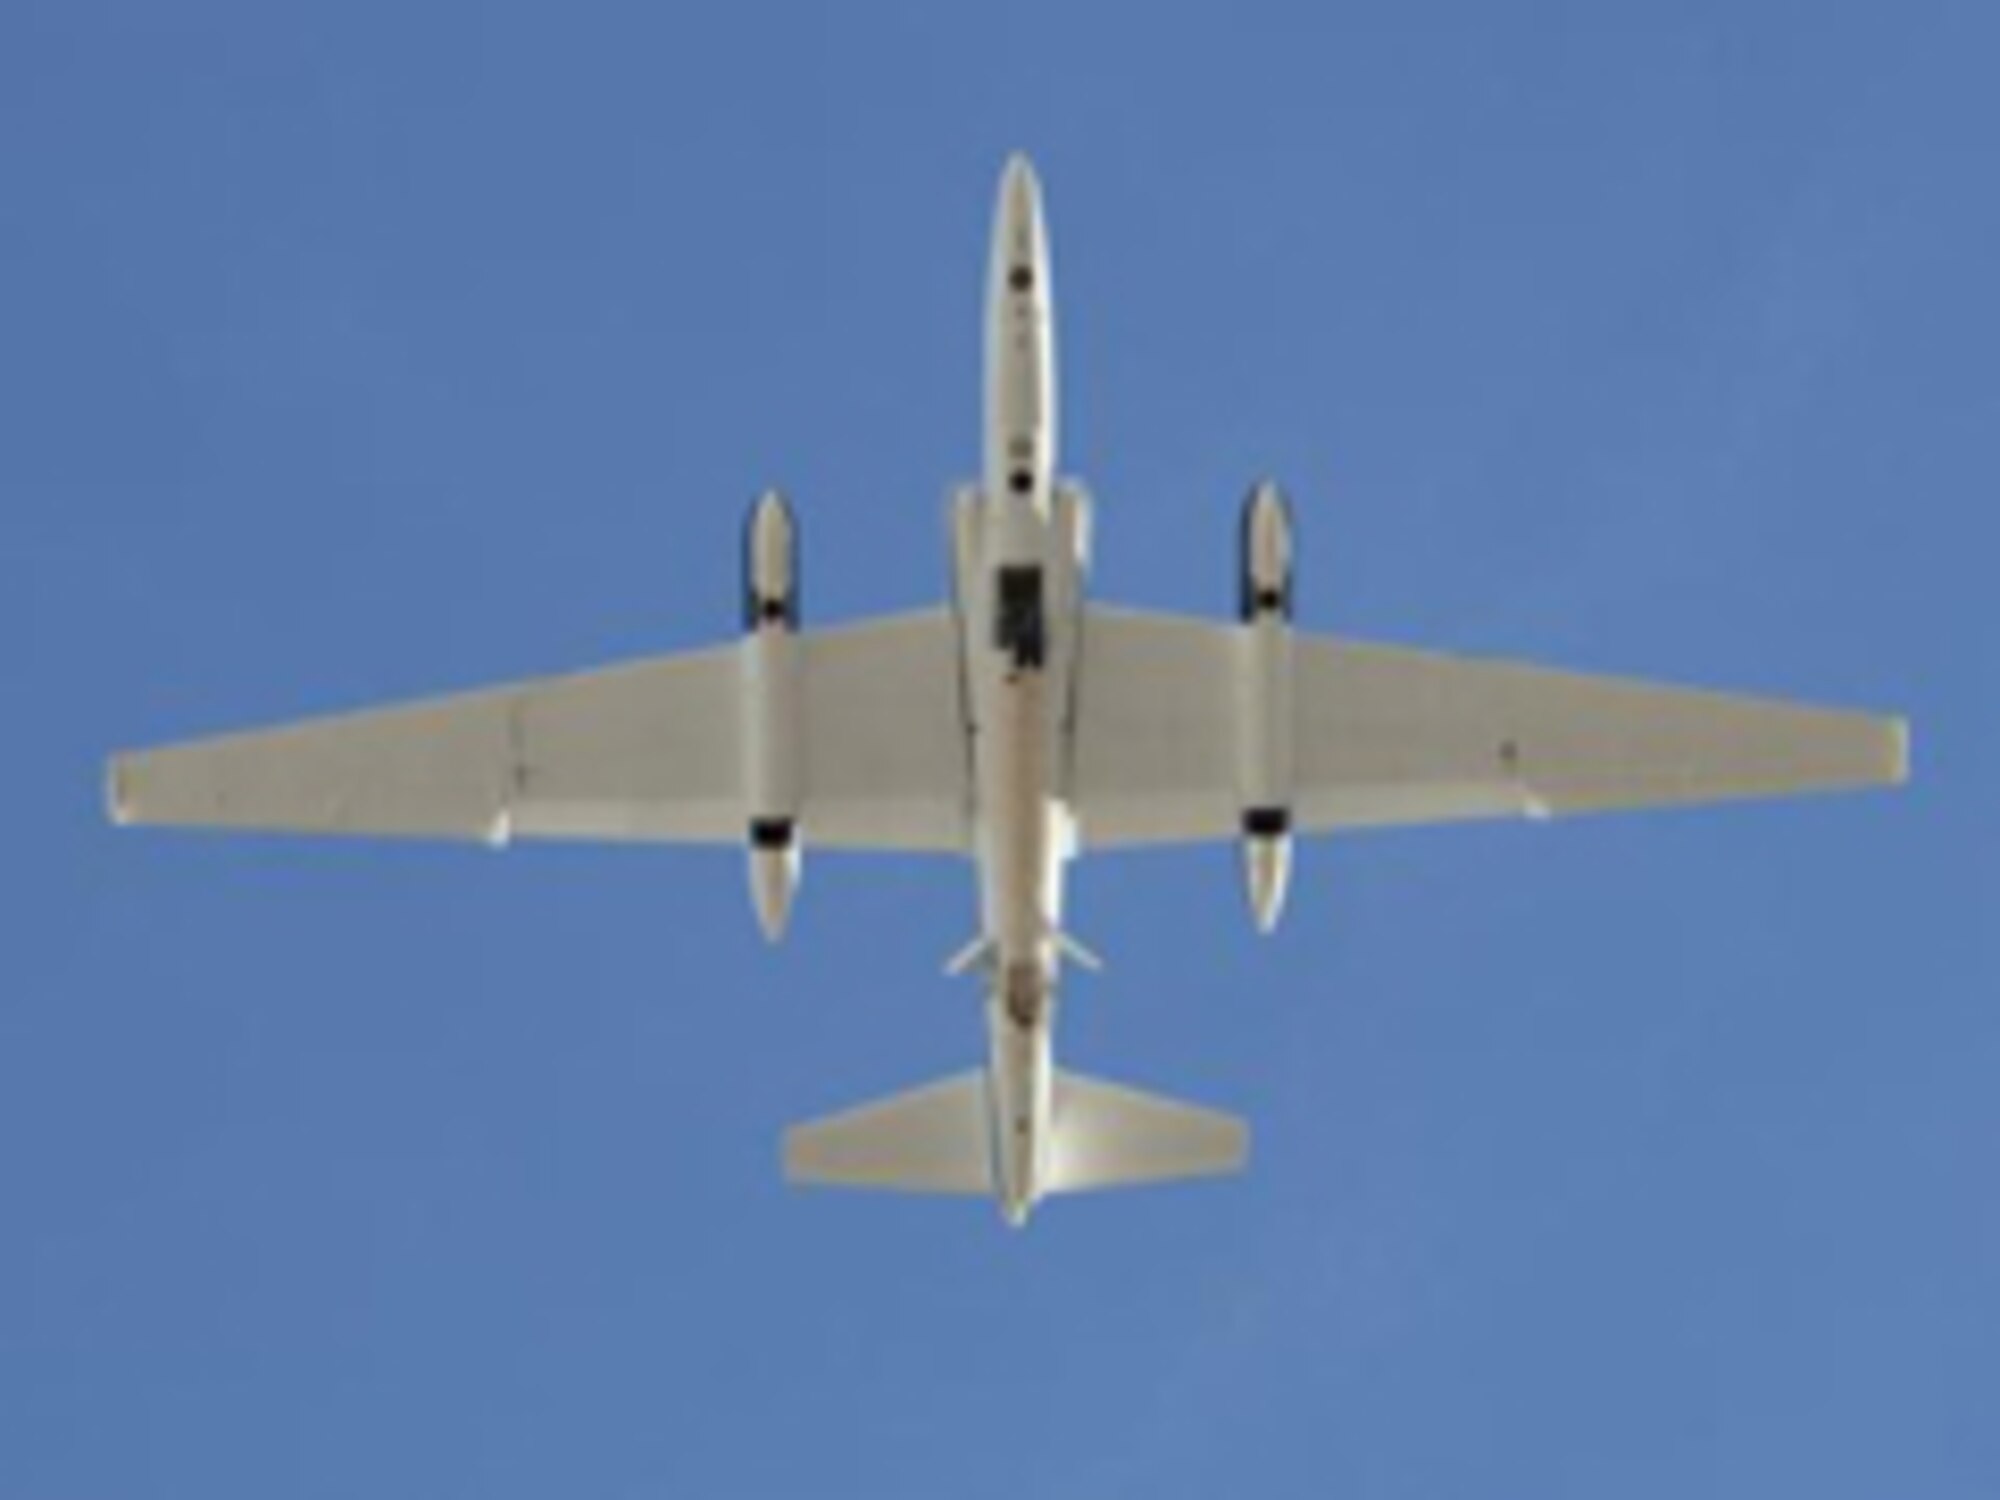 One of NASA's ER-2 aircraft, pictured here, soars high in the sky as it collects data in support of NASA's Sub-orbital Science Program. The aircraft, which supports numerous research projects, is capable of performing missions in excess of 10 hours and ranges of more than 6,000 nautical miles. The ER-2 can also carry up to 2,600 pounds. Photo courtesy of NASA